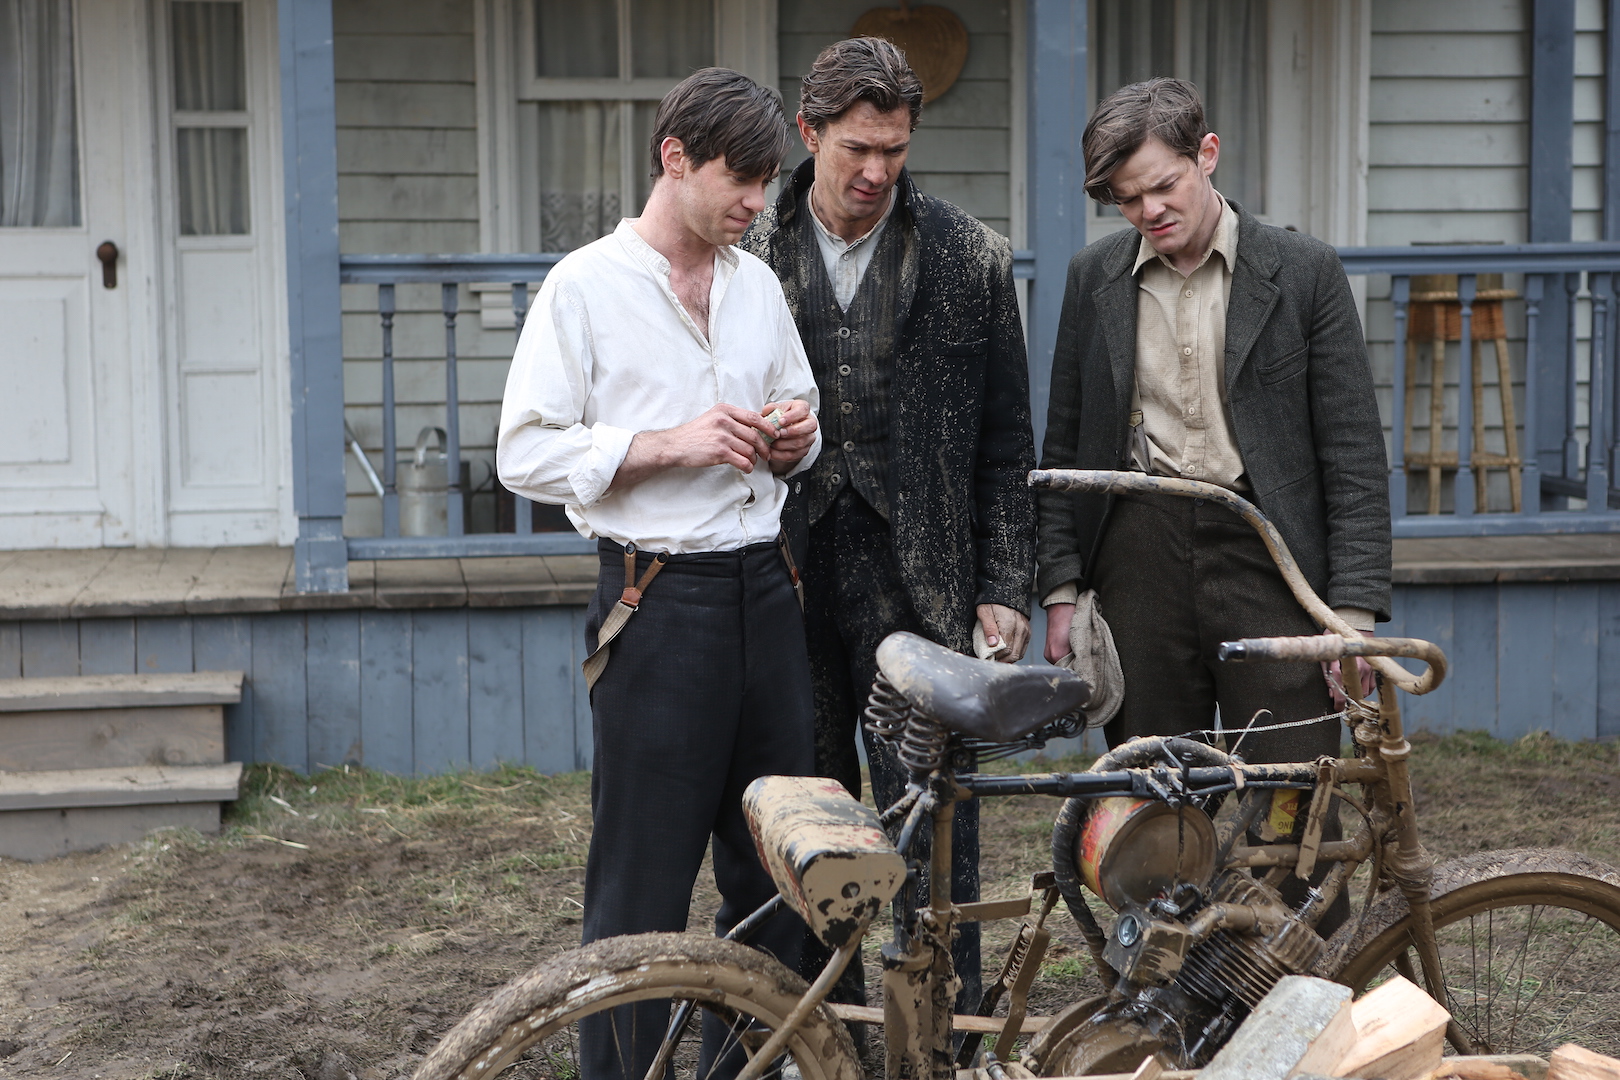 Harley and the Davidsons on Discovery Channel